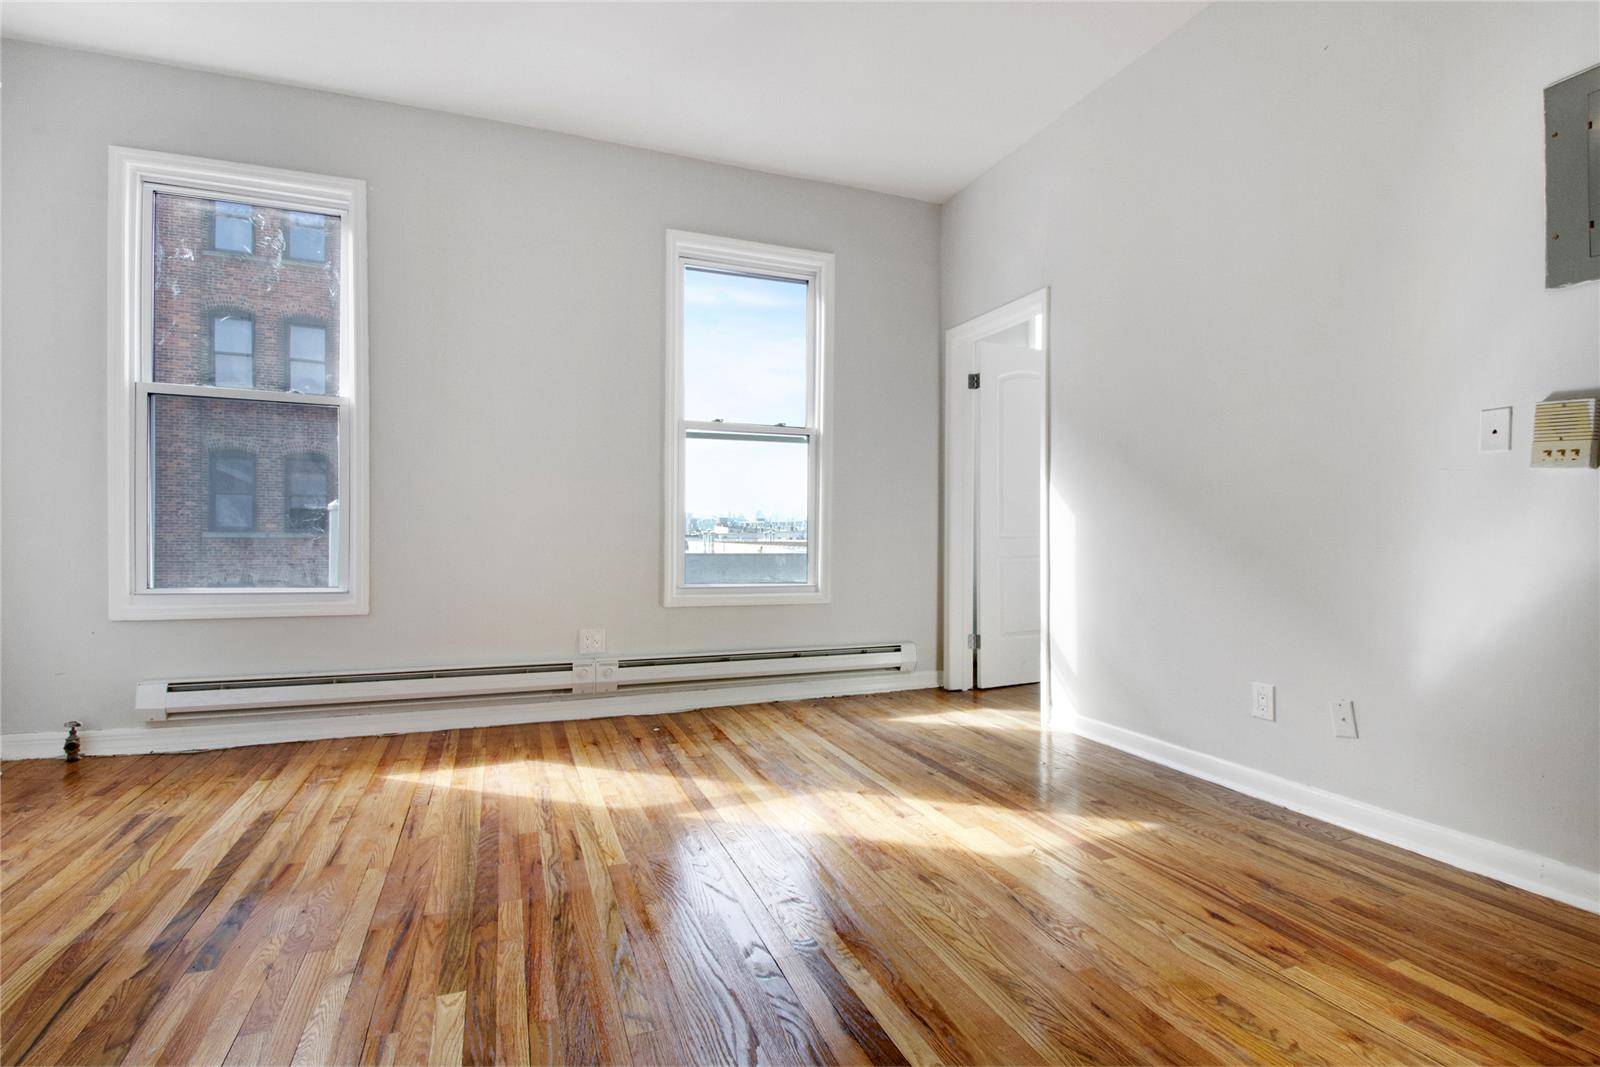 1. 399, 000 727 E 136th St, Bronx, Modern Gut Renovated Multi Family with a total of 3 legal units.